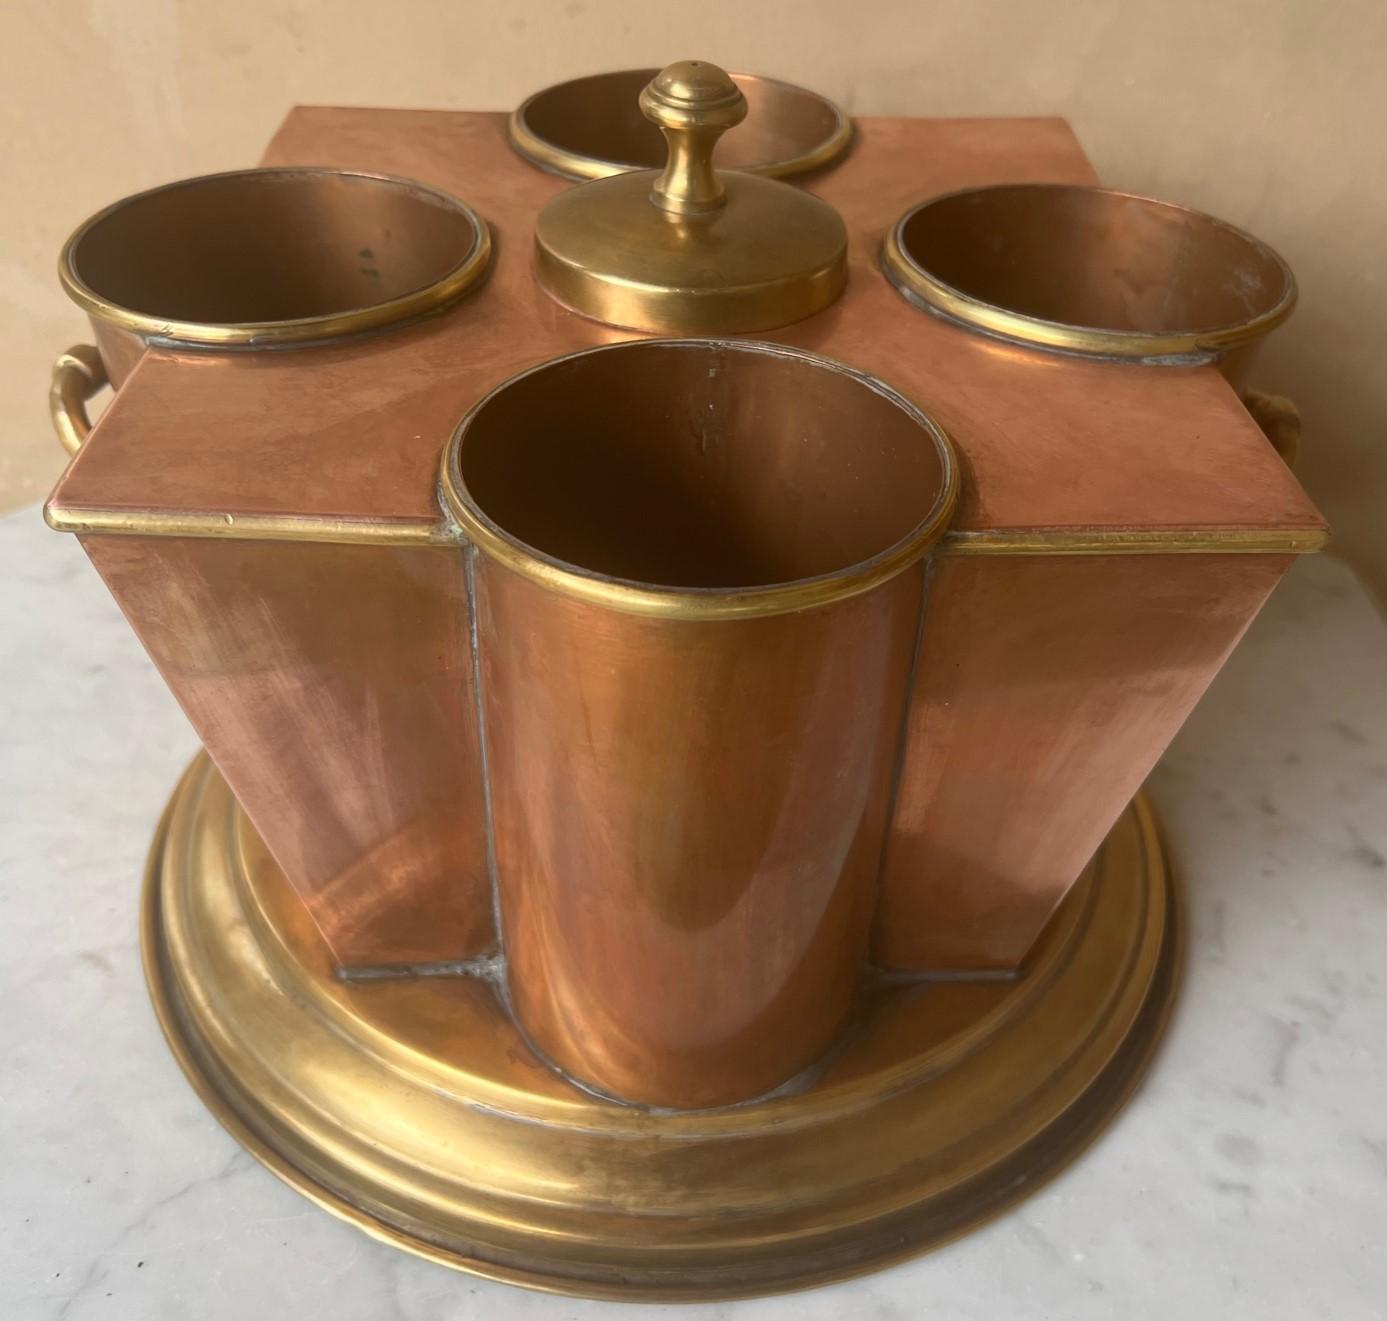 Anodized Vintage Copper and Brass Four Bottle Wine Cooler